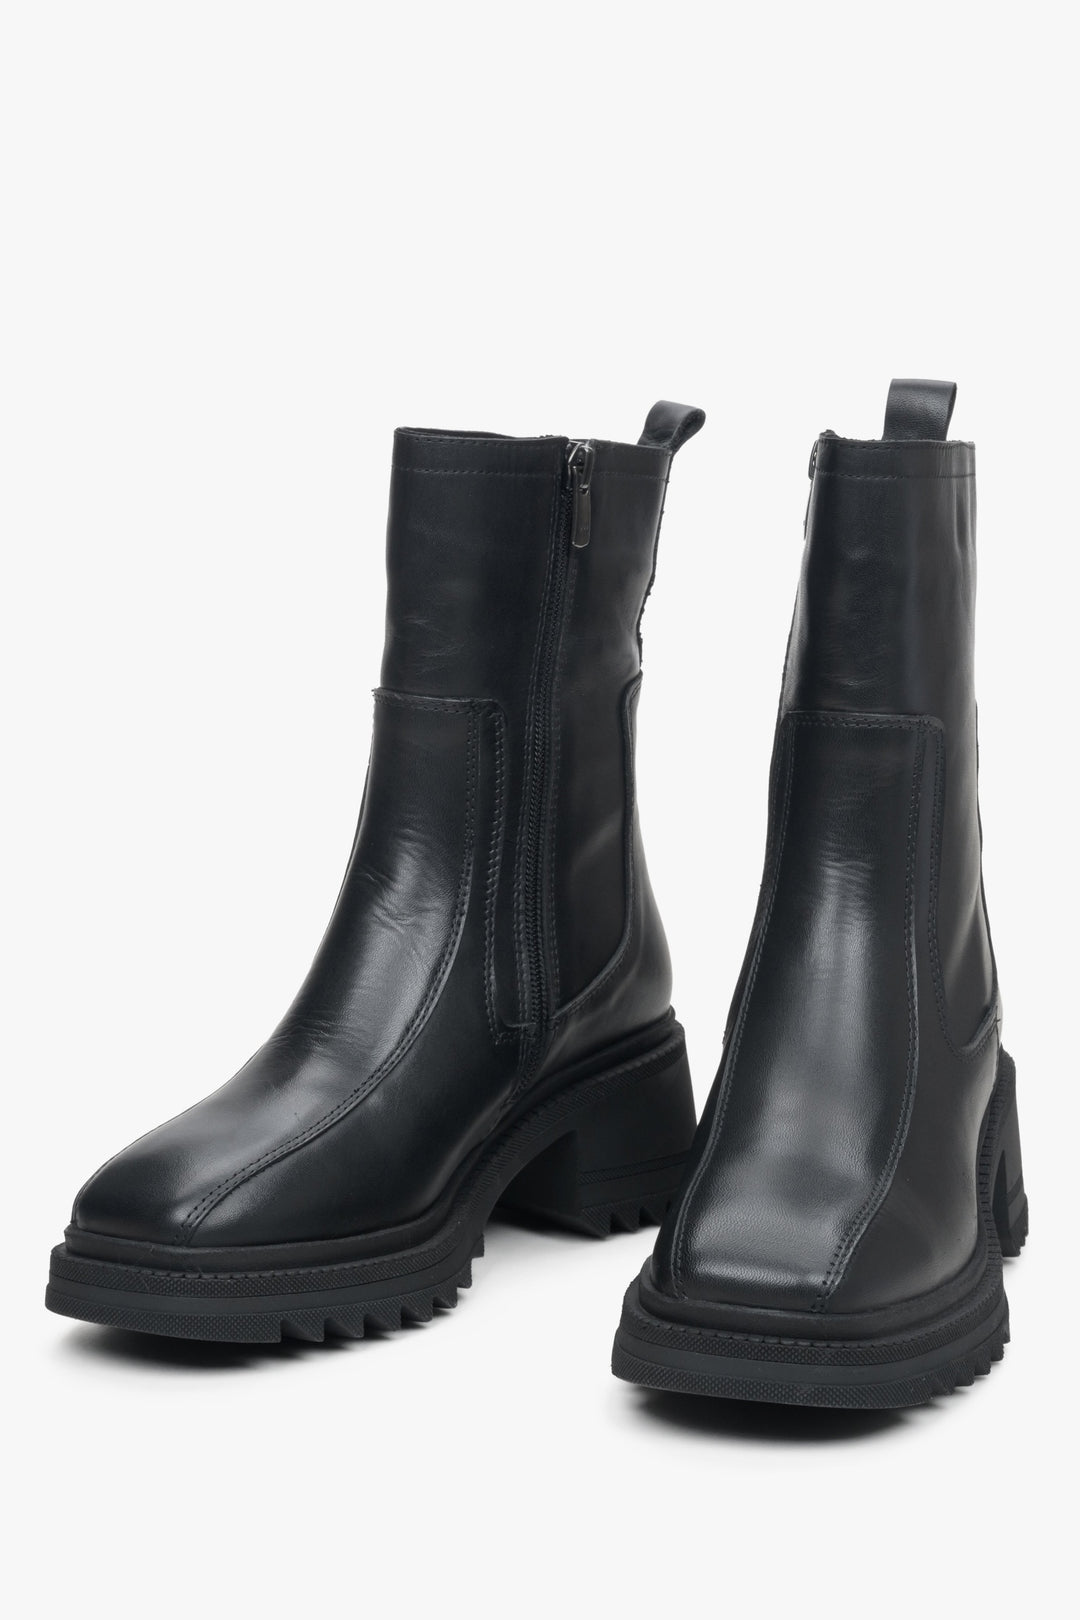 Women's black leather boots by Estro - close-up on the front of the model.